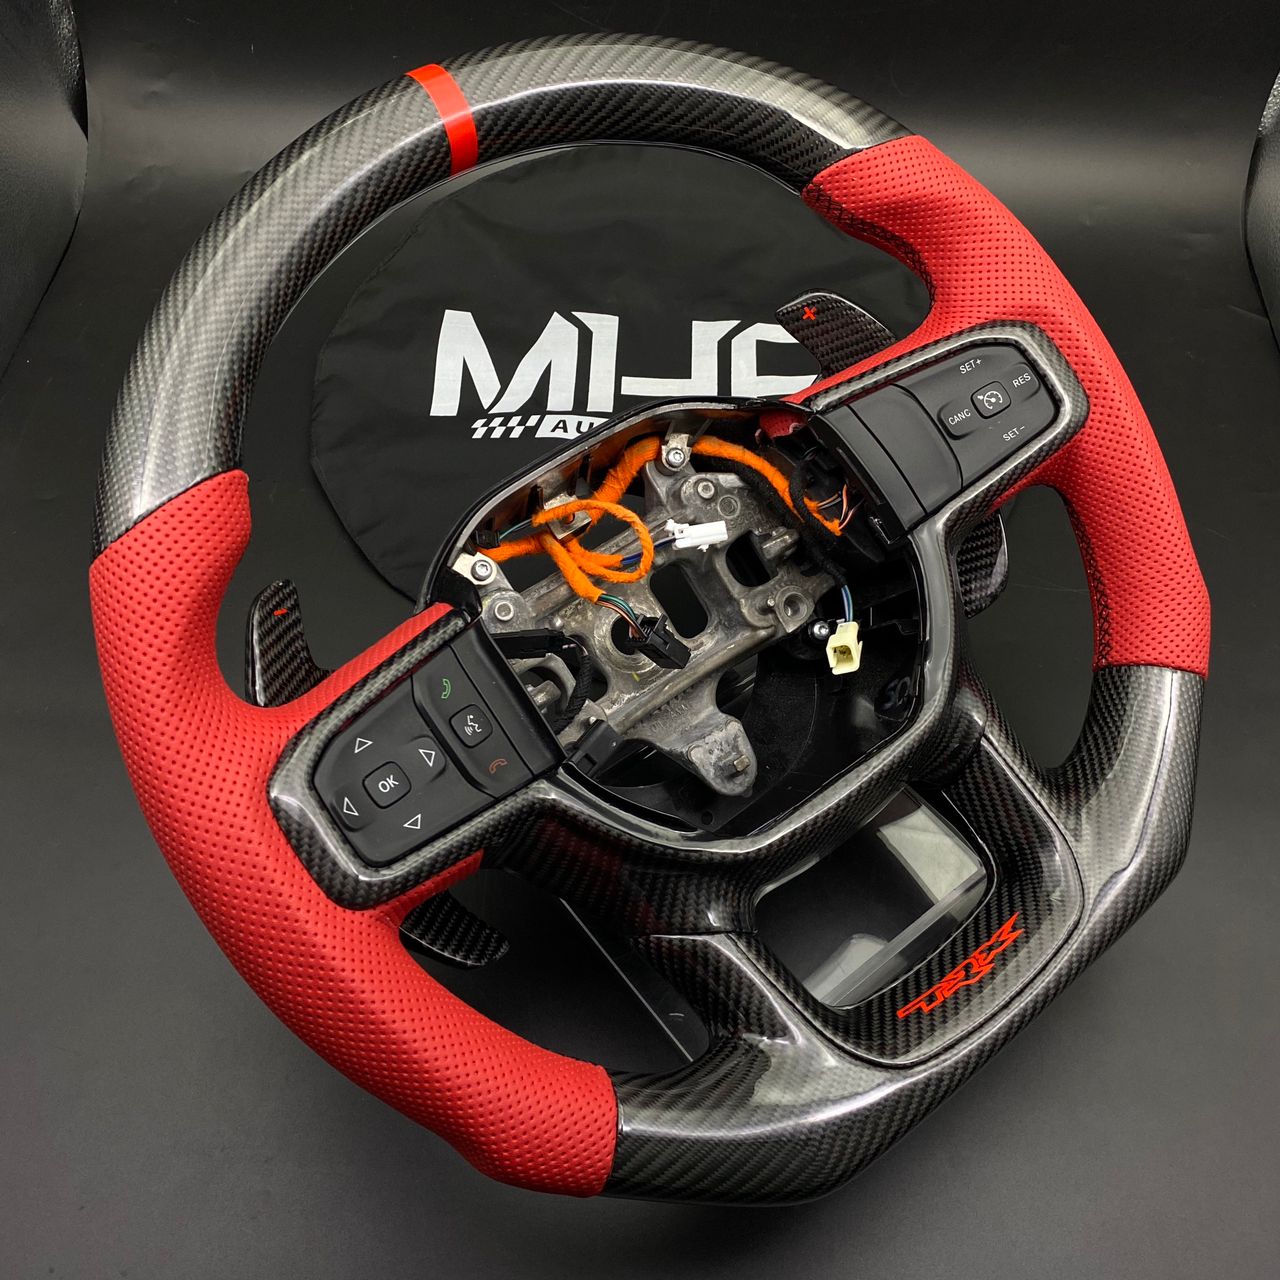 2021-2023 Dodge RAM Carbon Red Accent “TRX” Steering Wheel